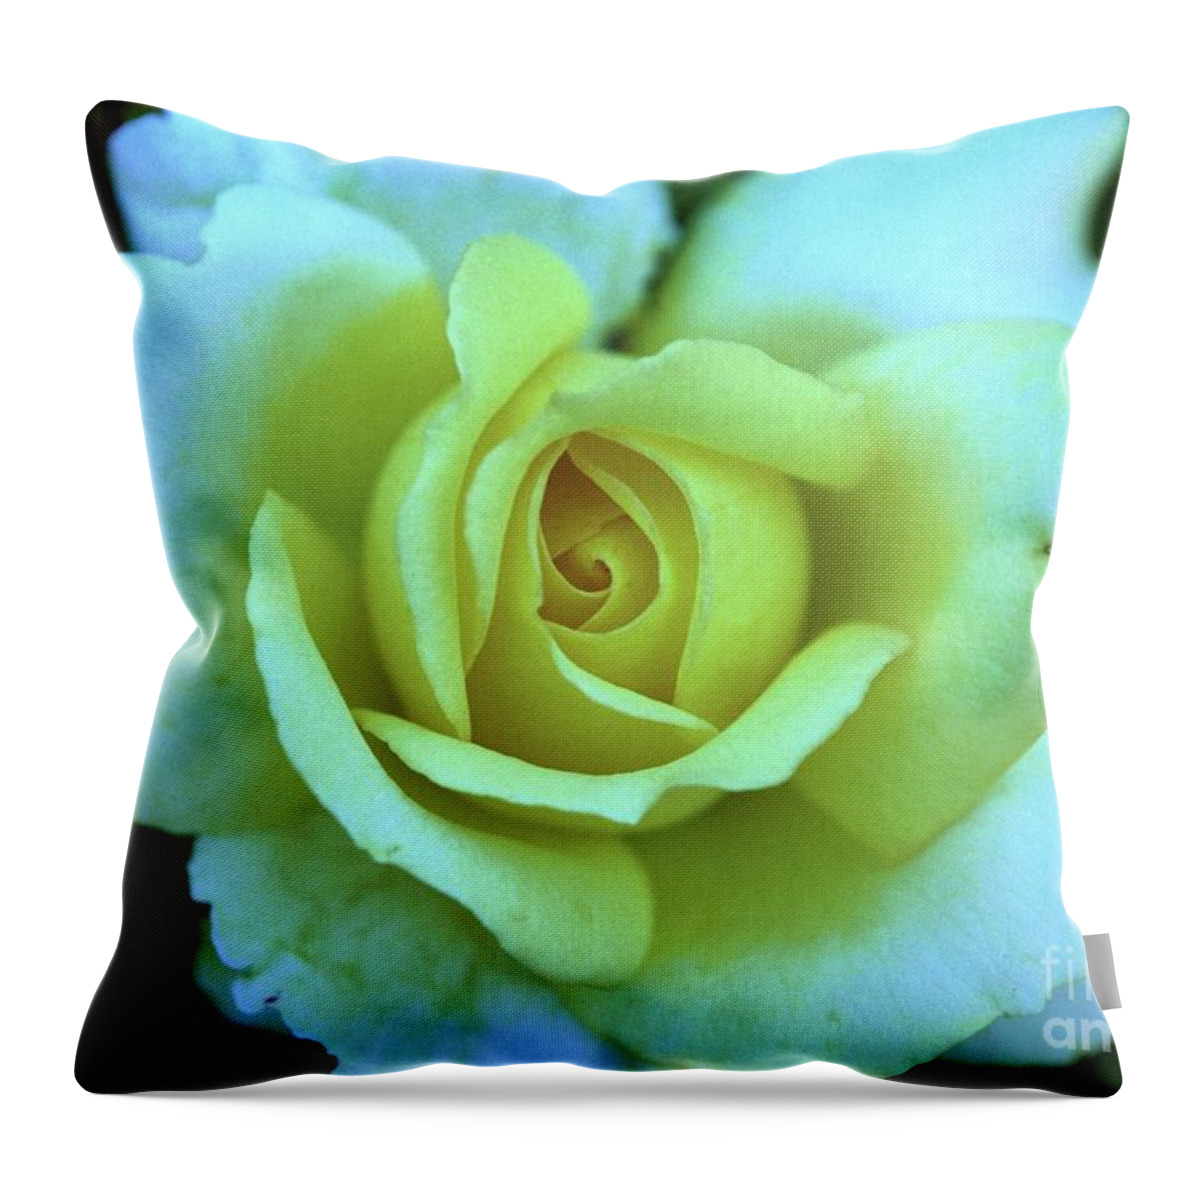 Yellow Rose Throw Pillow featuring the photograph Yellow Rose by Allen Beatty